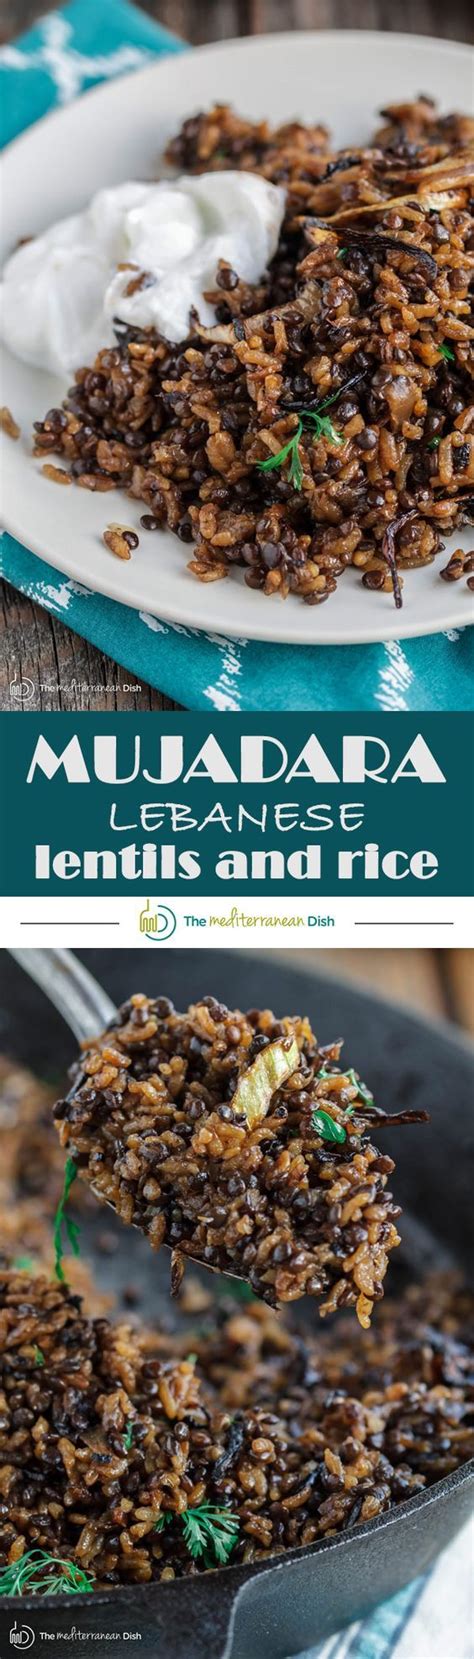 This lebanese rice dish is easy and light tasting. Mujadara: Lentils and Rice with Crispy Onions | The Mediterranean Dish. The intense flavor of ...